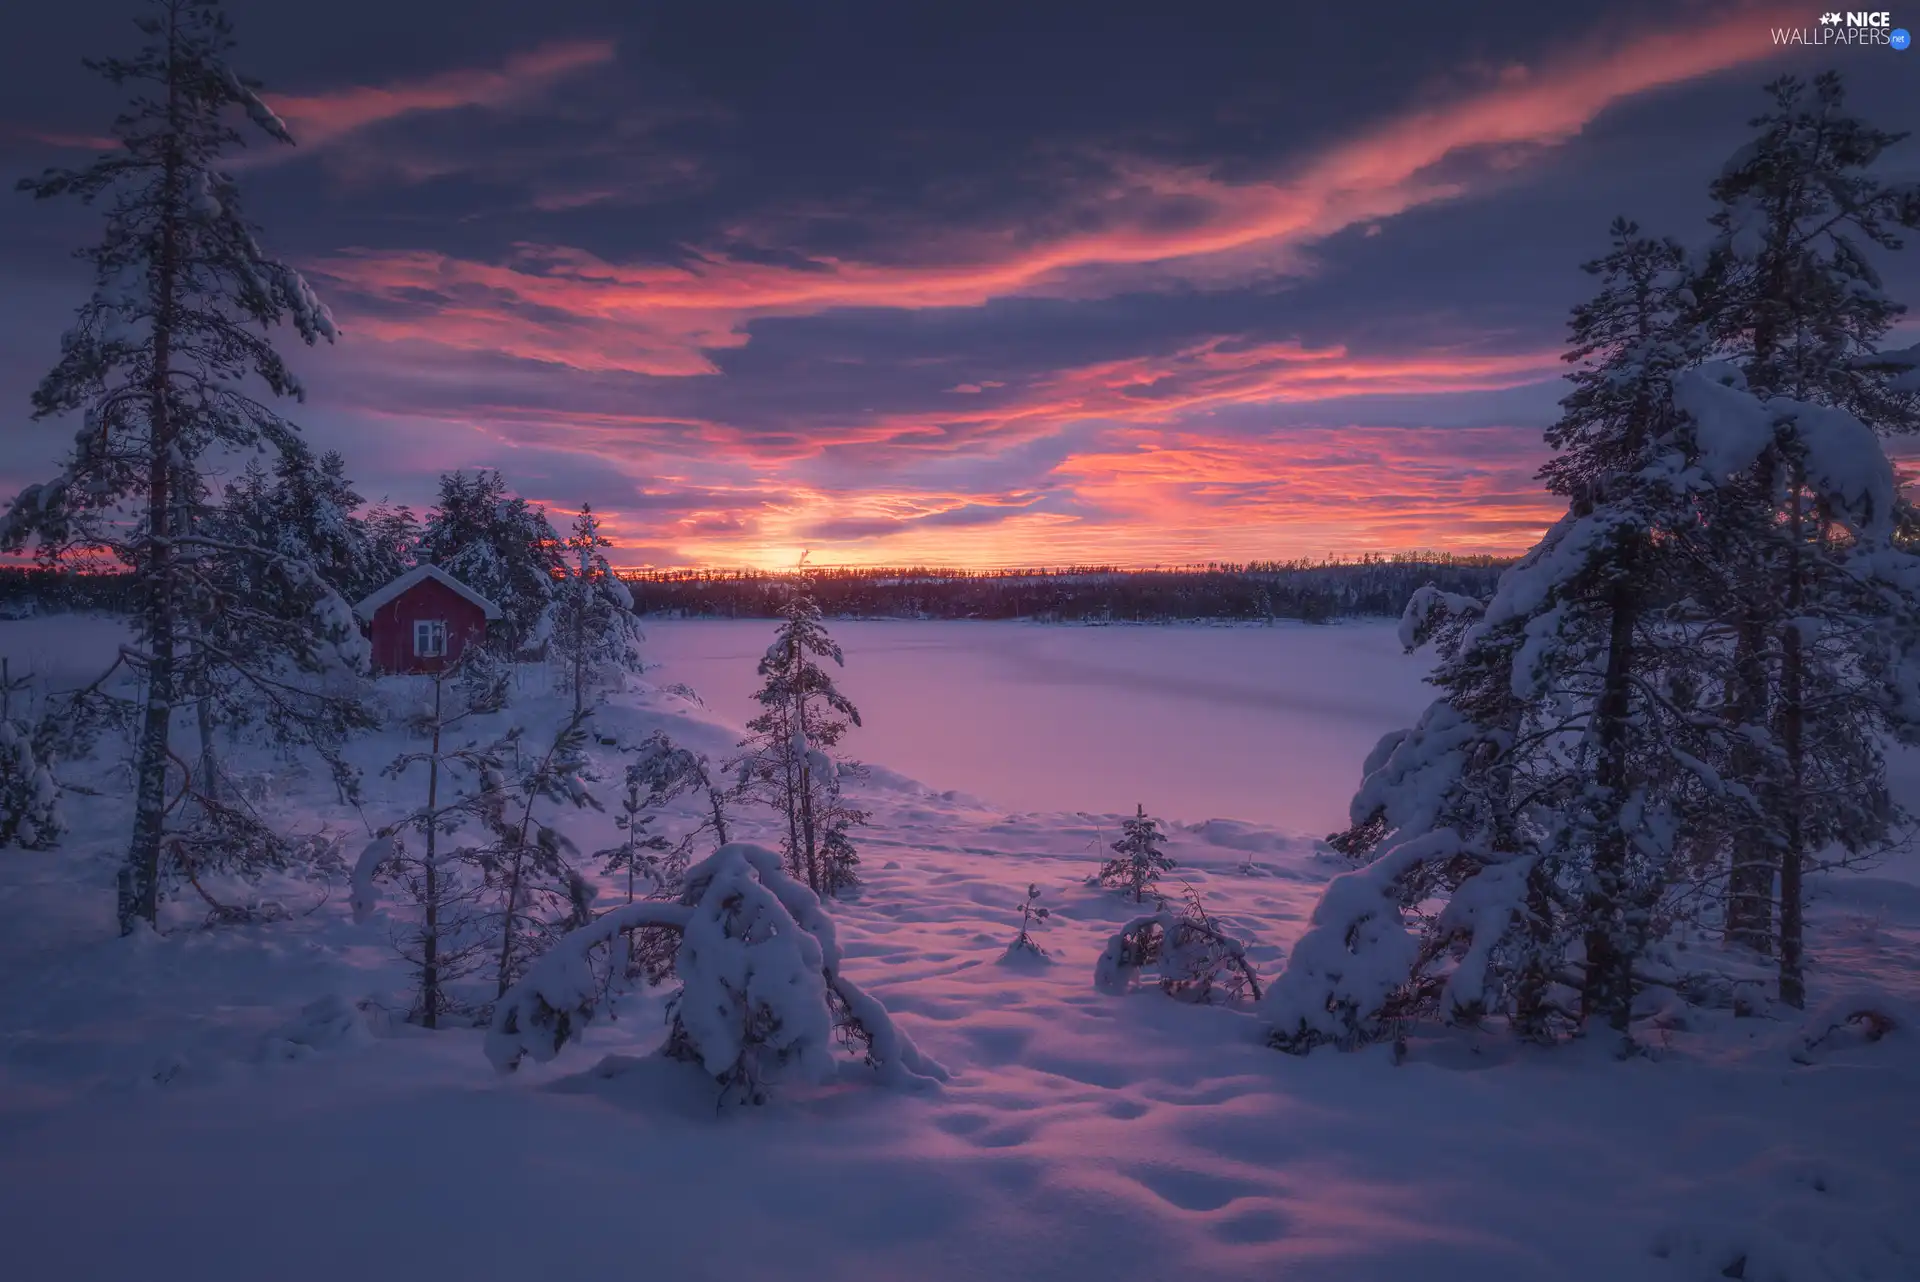 clouds, trees, house, Ringerike, snowy, winter, viewes, Norway, Great Sunsets, lake